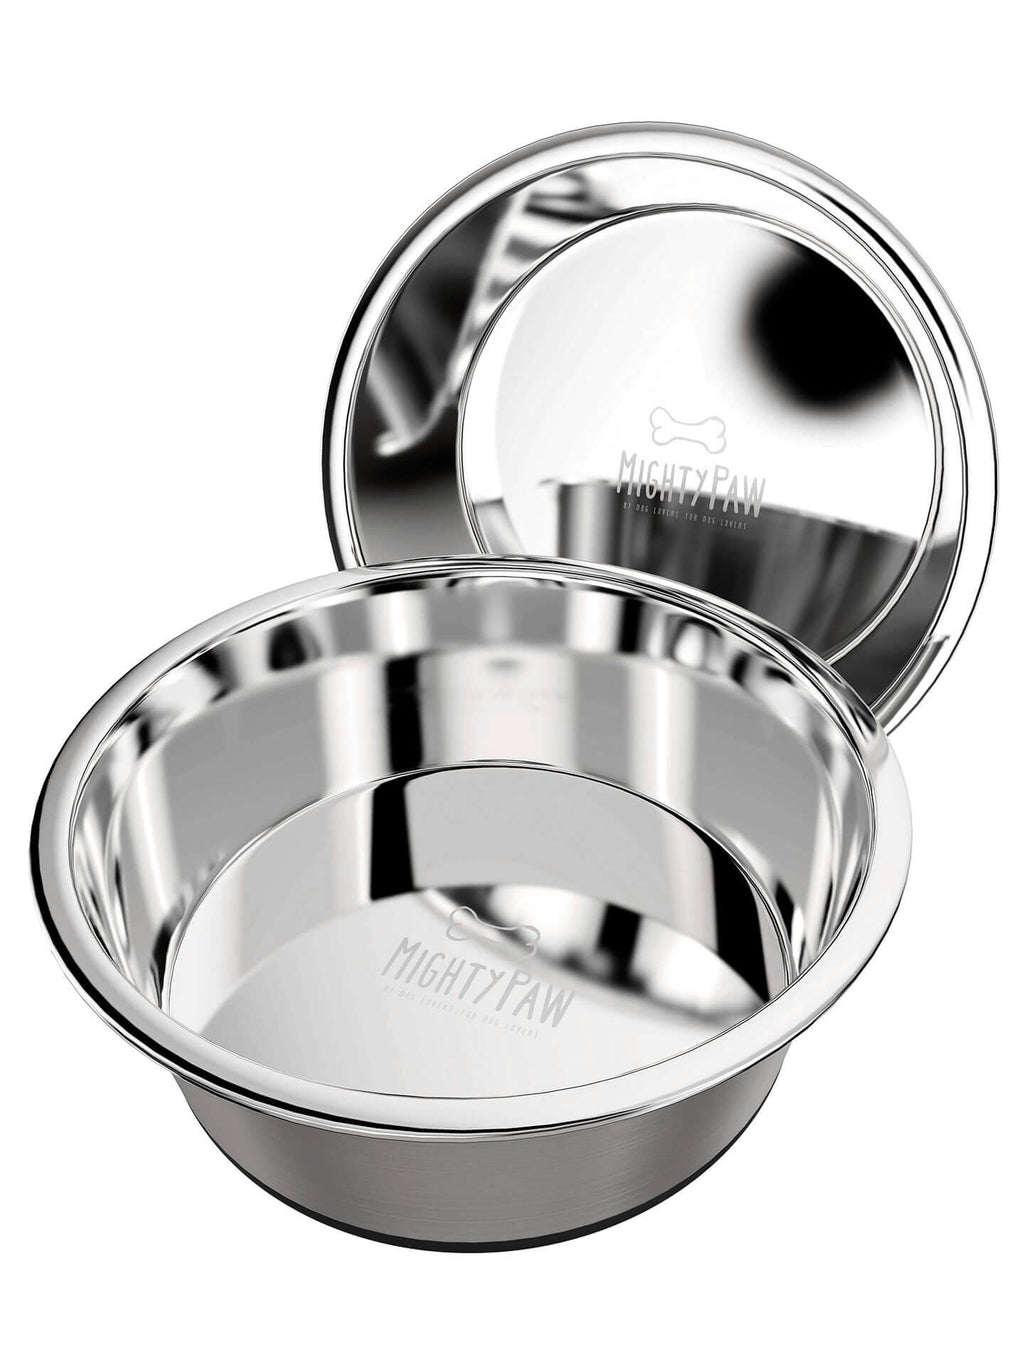 Tuff Pupper 100 oz Heavy Duty Insulated Stainless Steel Dog Bowl for Large  Dogs, Non-Slip Base, Dishwasher Safe